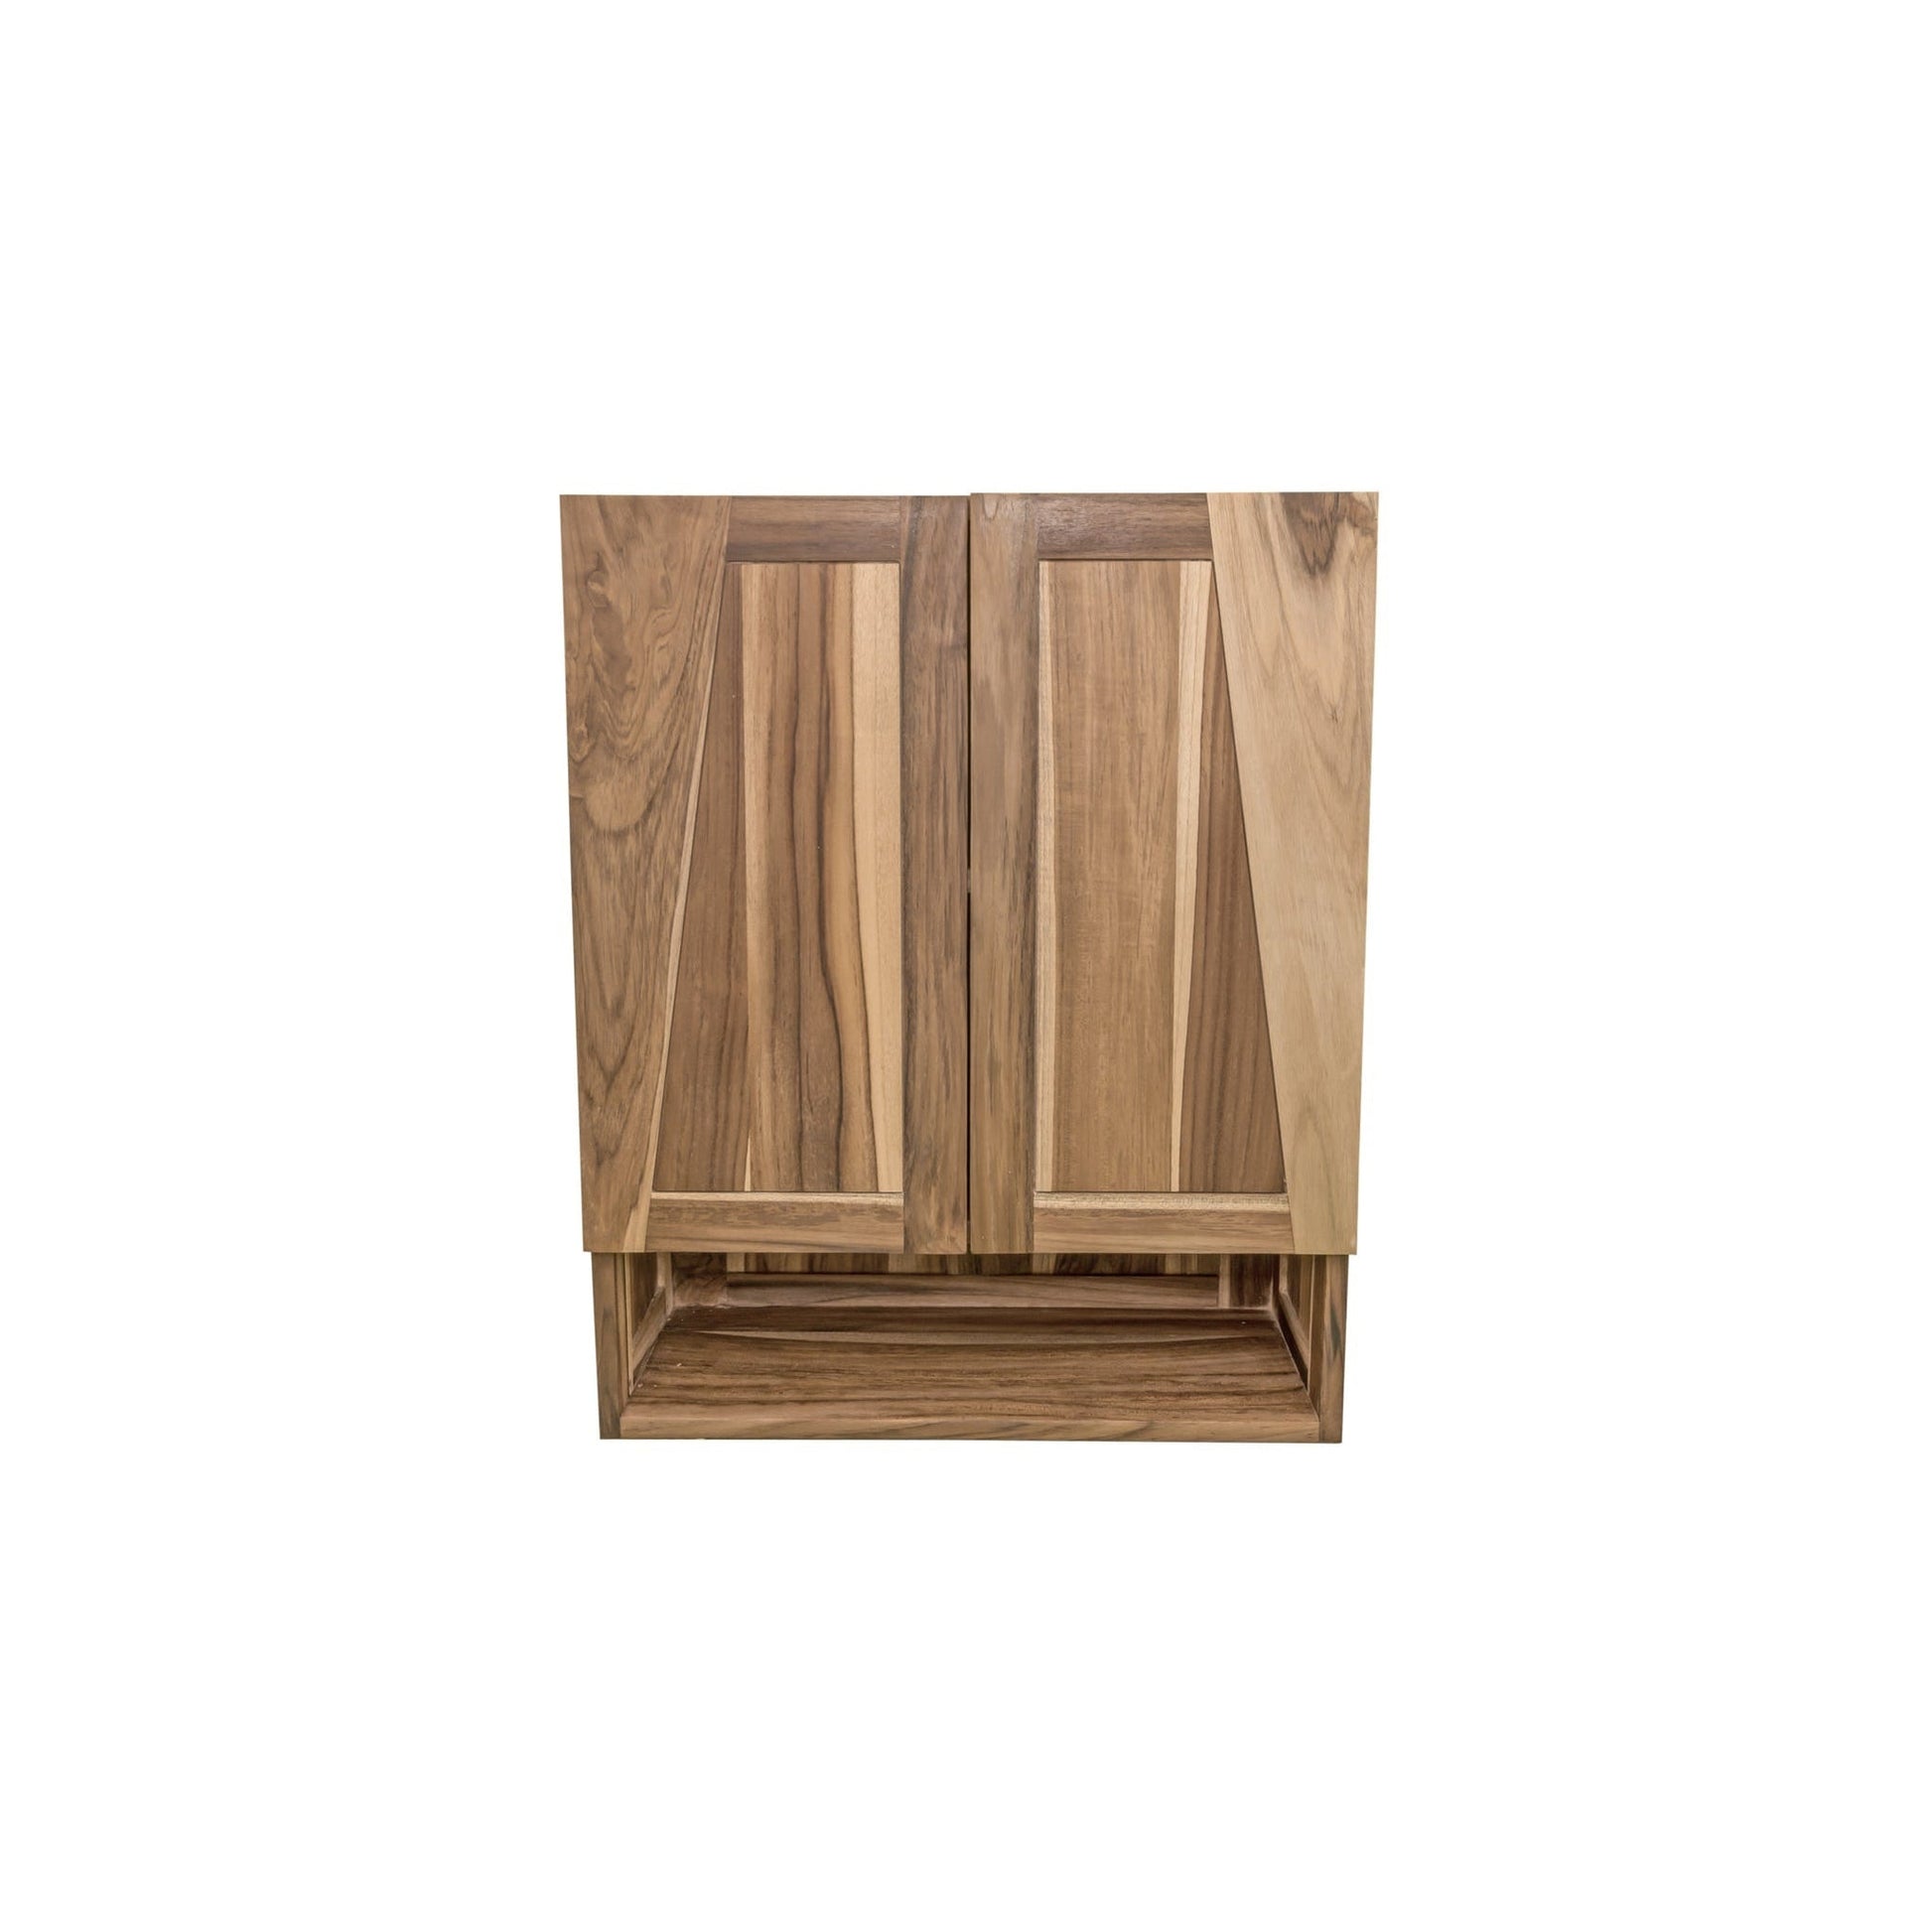 EcoDecors Significado 24" EarthyTeak Solid Teak Wood Fully Assembled Wall Cabinet